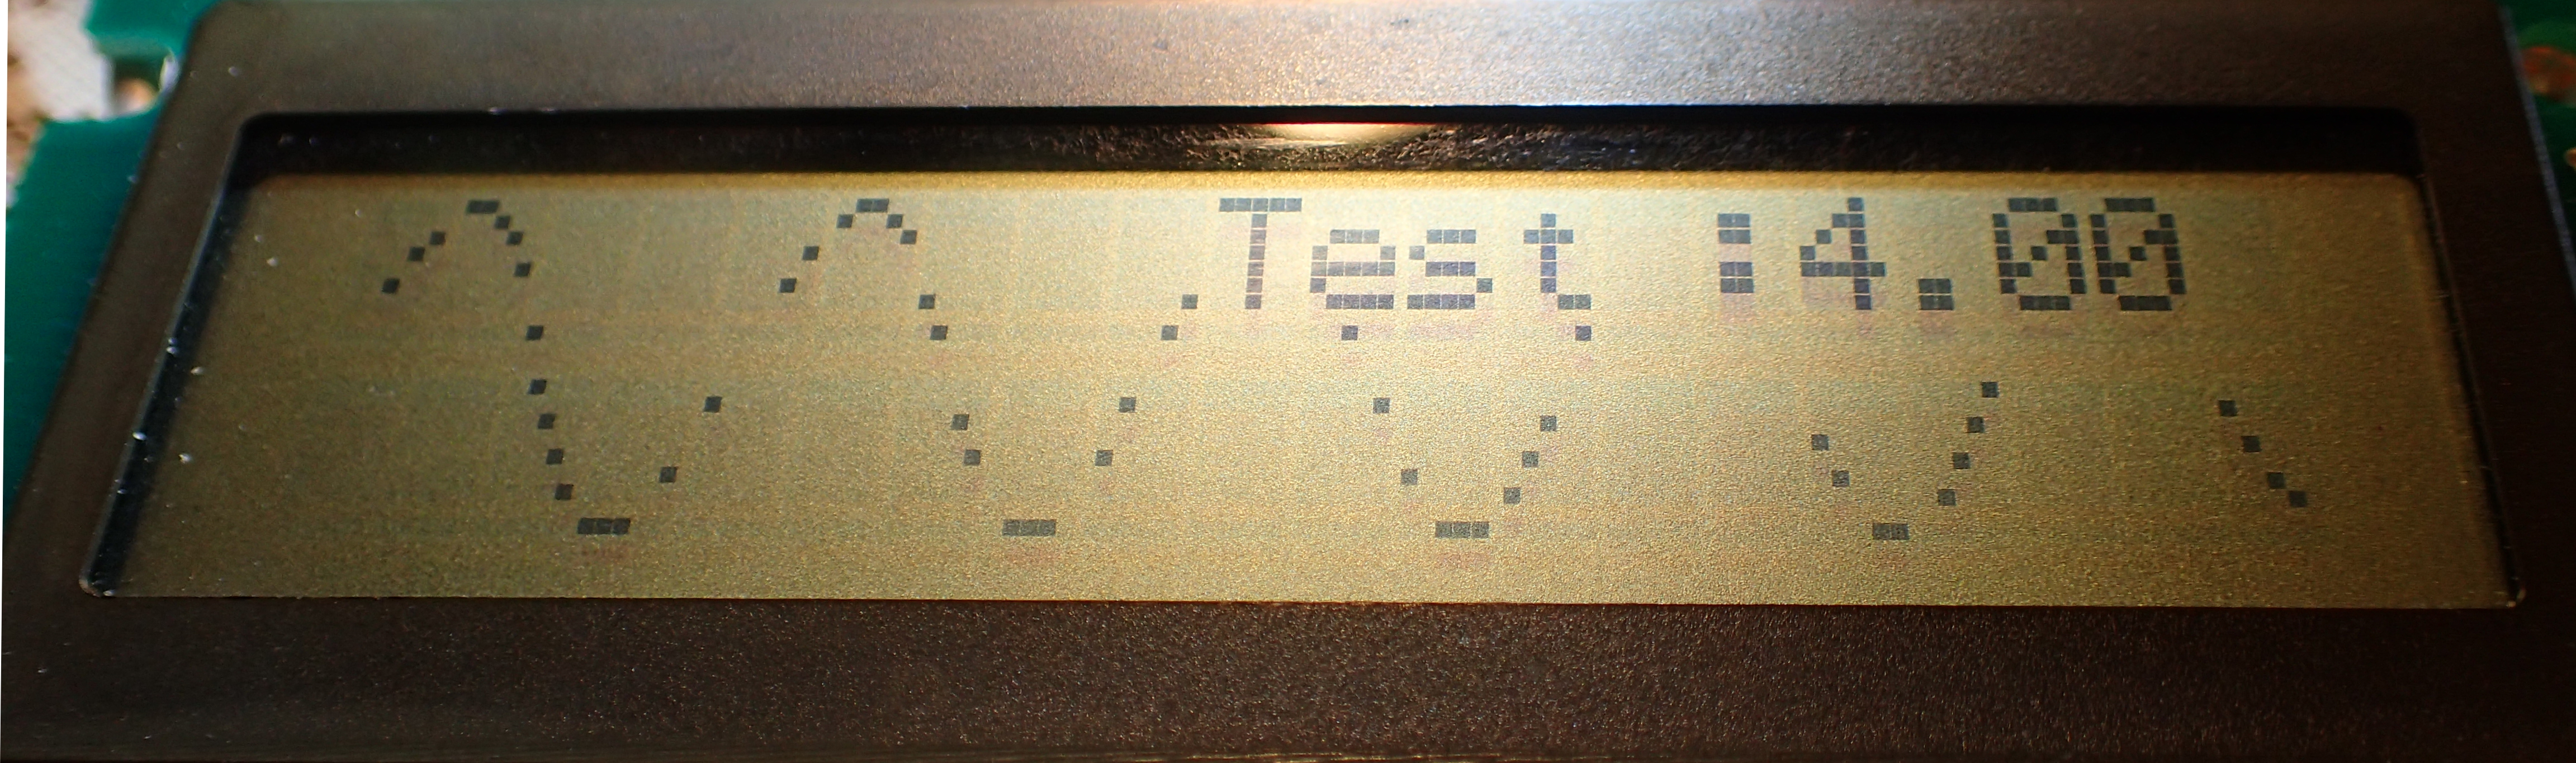 uPD7228 LCD displaying graphics and text